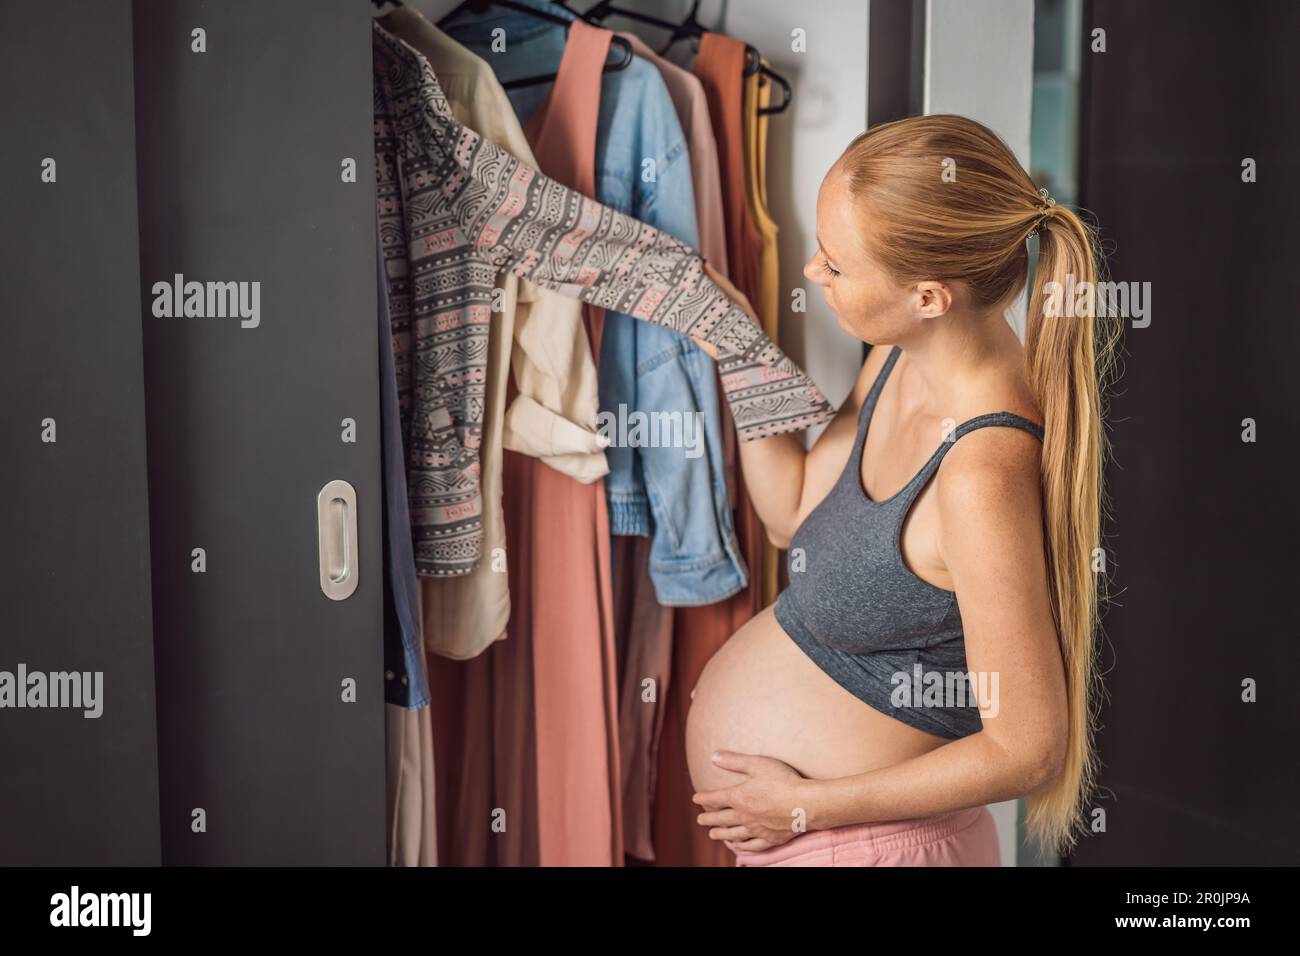 A Pregnant Woman Has Nothing To Wear. A Pregnant Woman Stands In Front Of A  Closet With Clothes And Does Not Know What To Wear Because The Clothes Do  Not Fit On